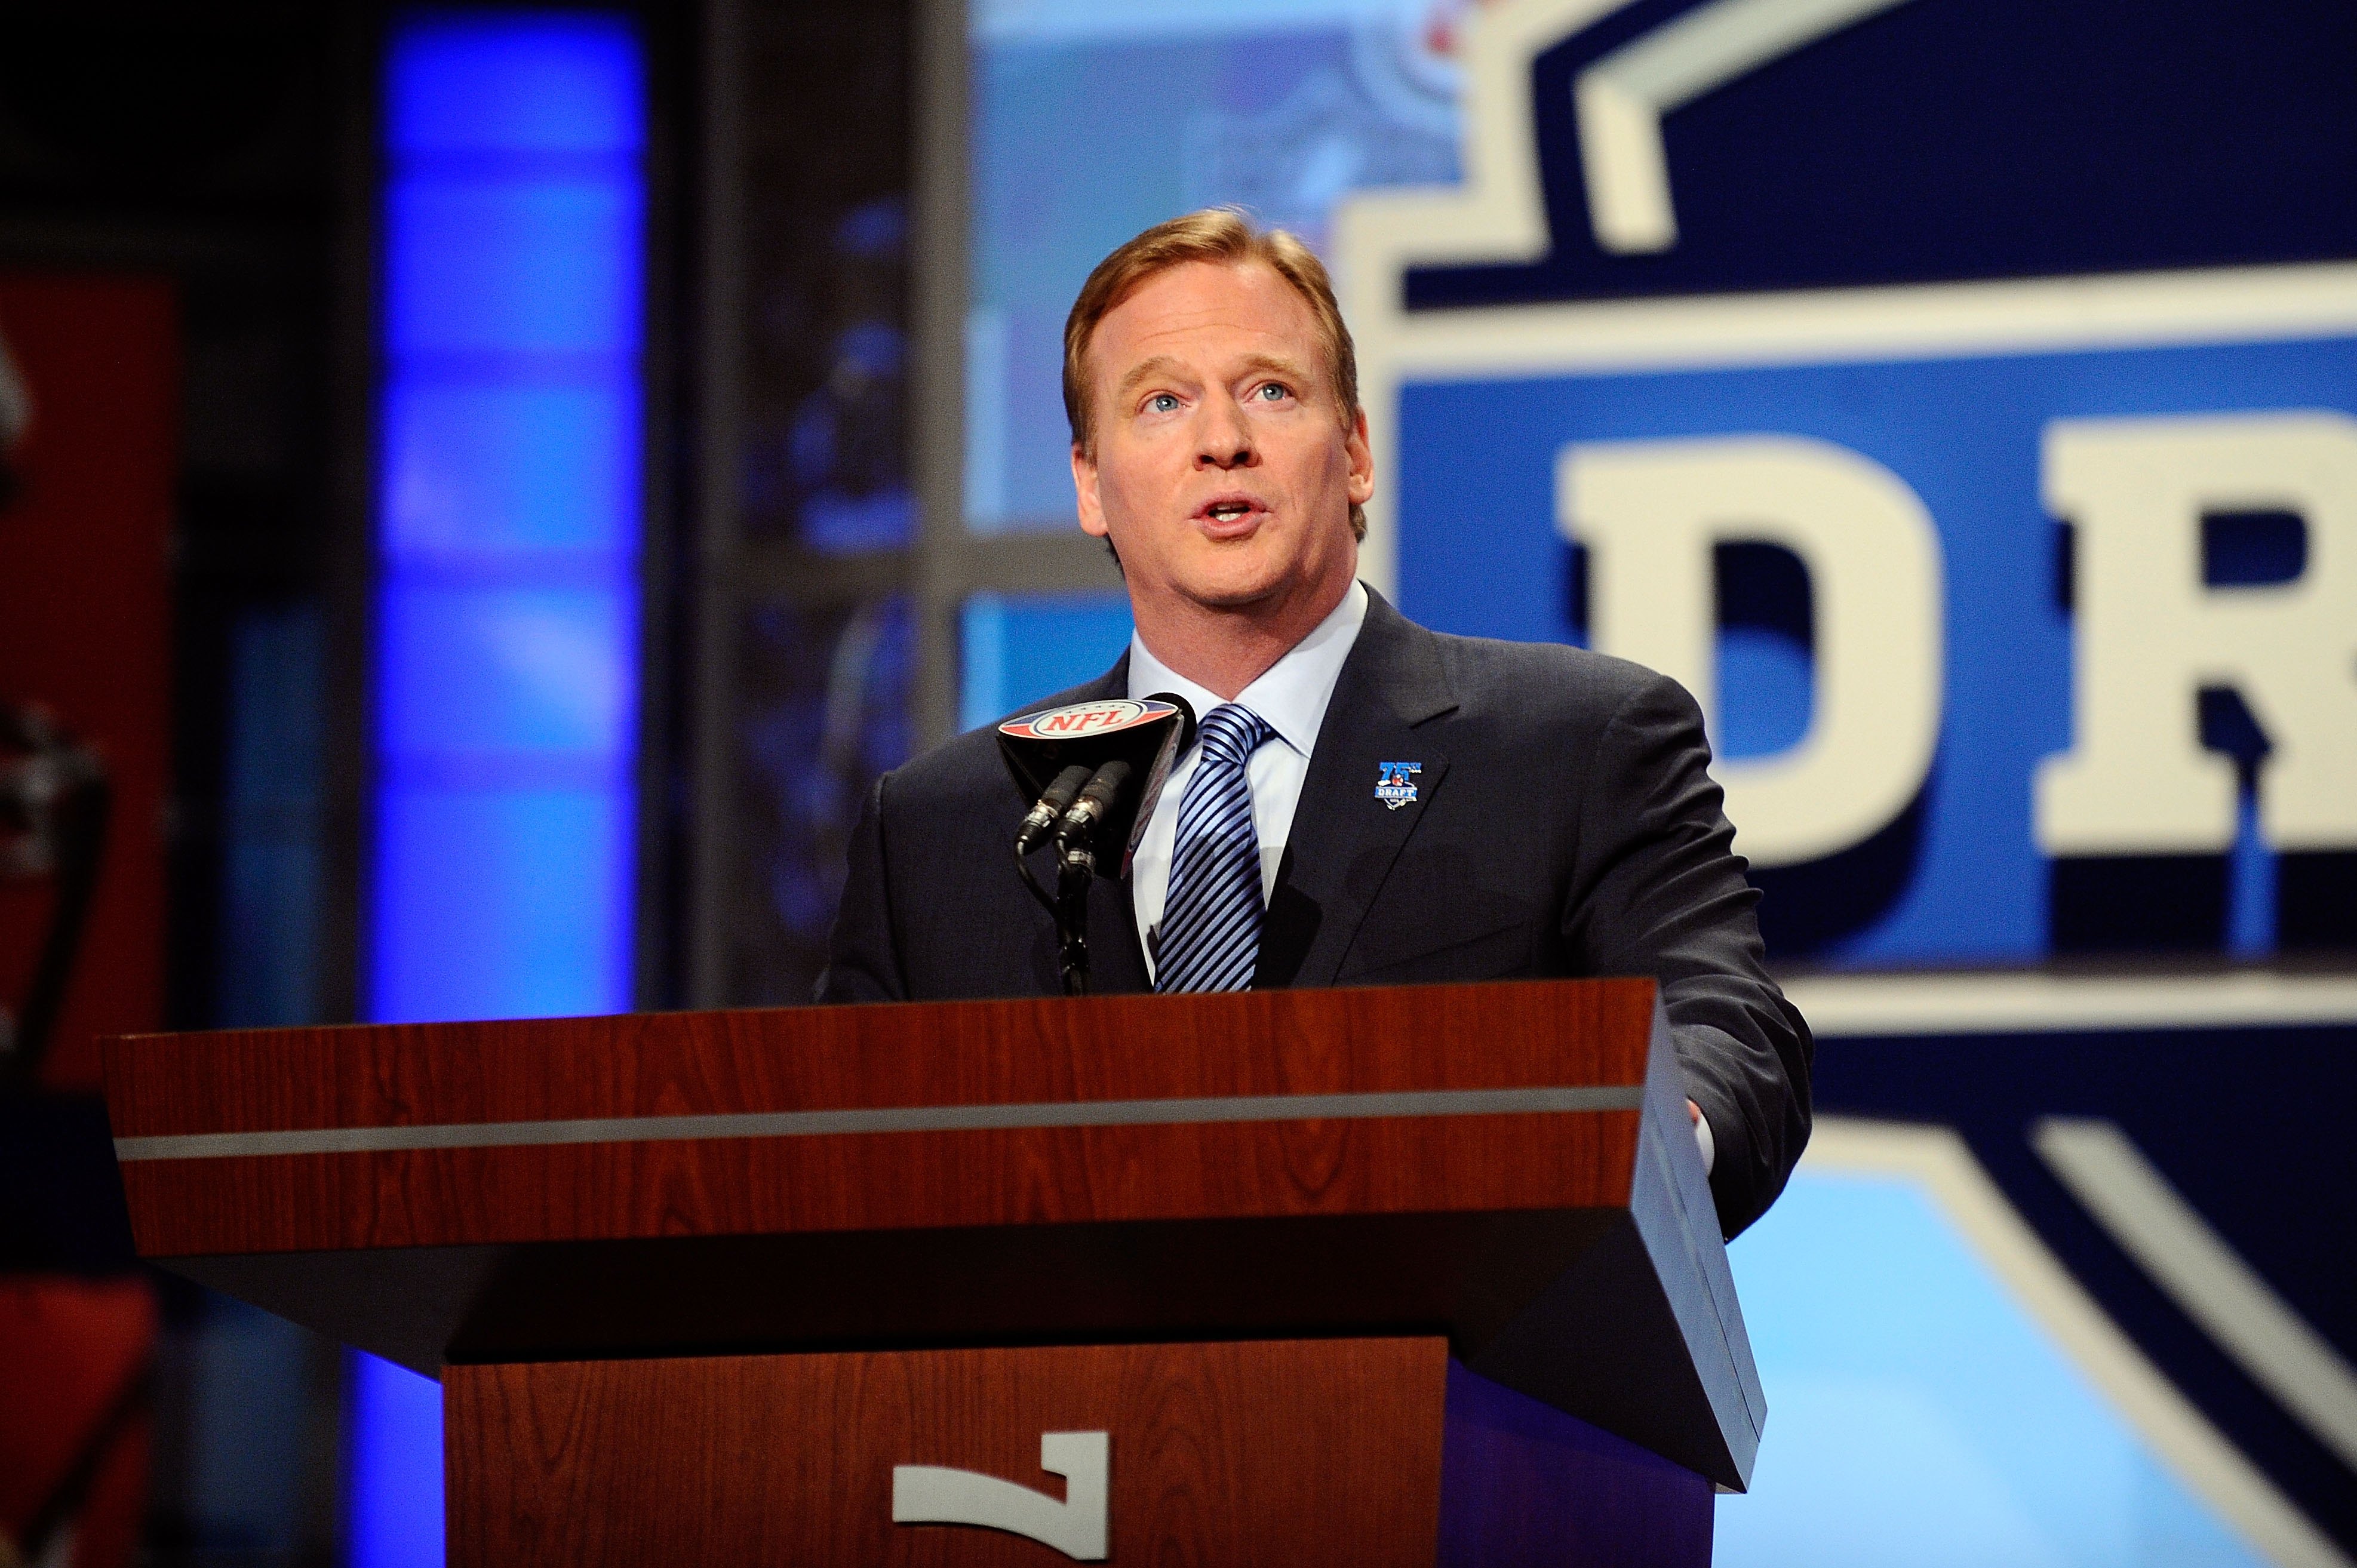 NEW YORK - APRIL 22:  NFL Commissioner Roer Goodell speaks at the podium during the first round of the 2010 NFL Draft at Radio City Music Hall on April 22, 2010 in New York City.  (Photo by Jeff Zelevansky/Getty Images)